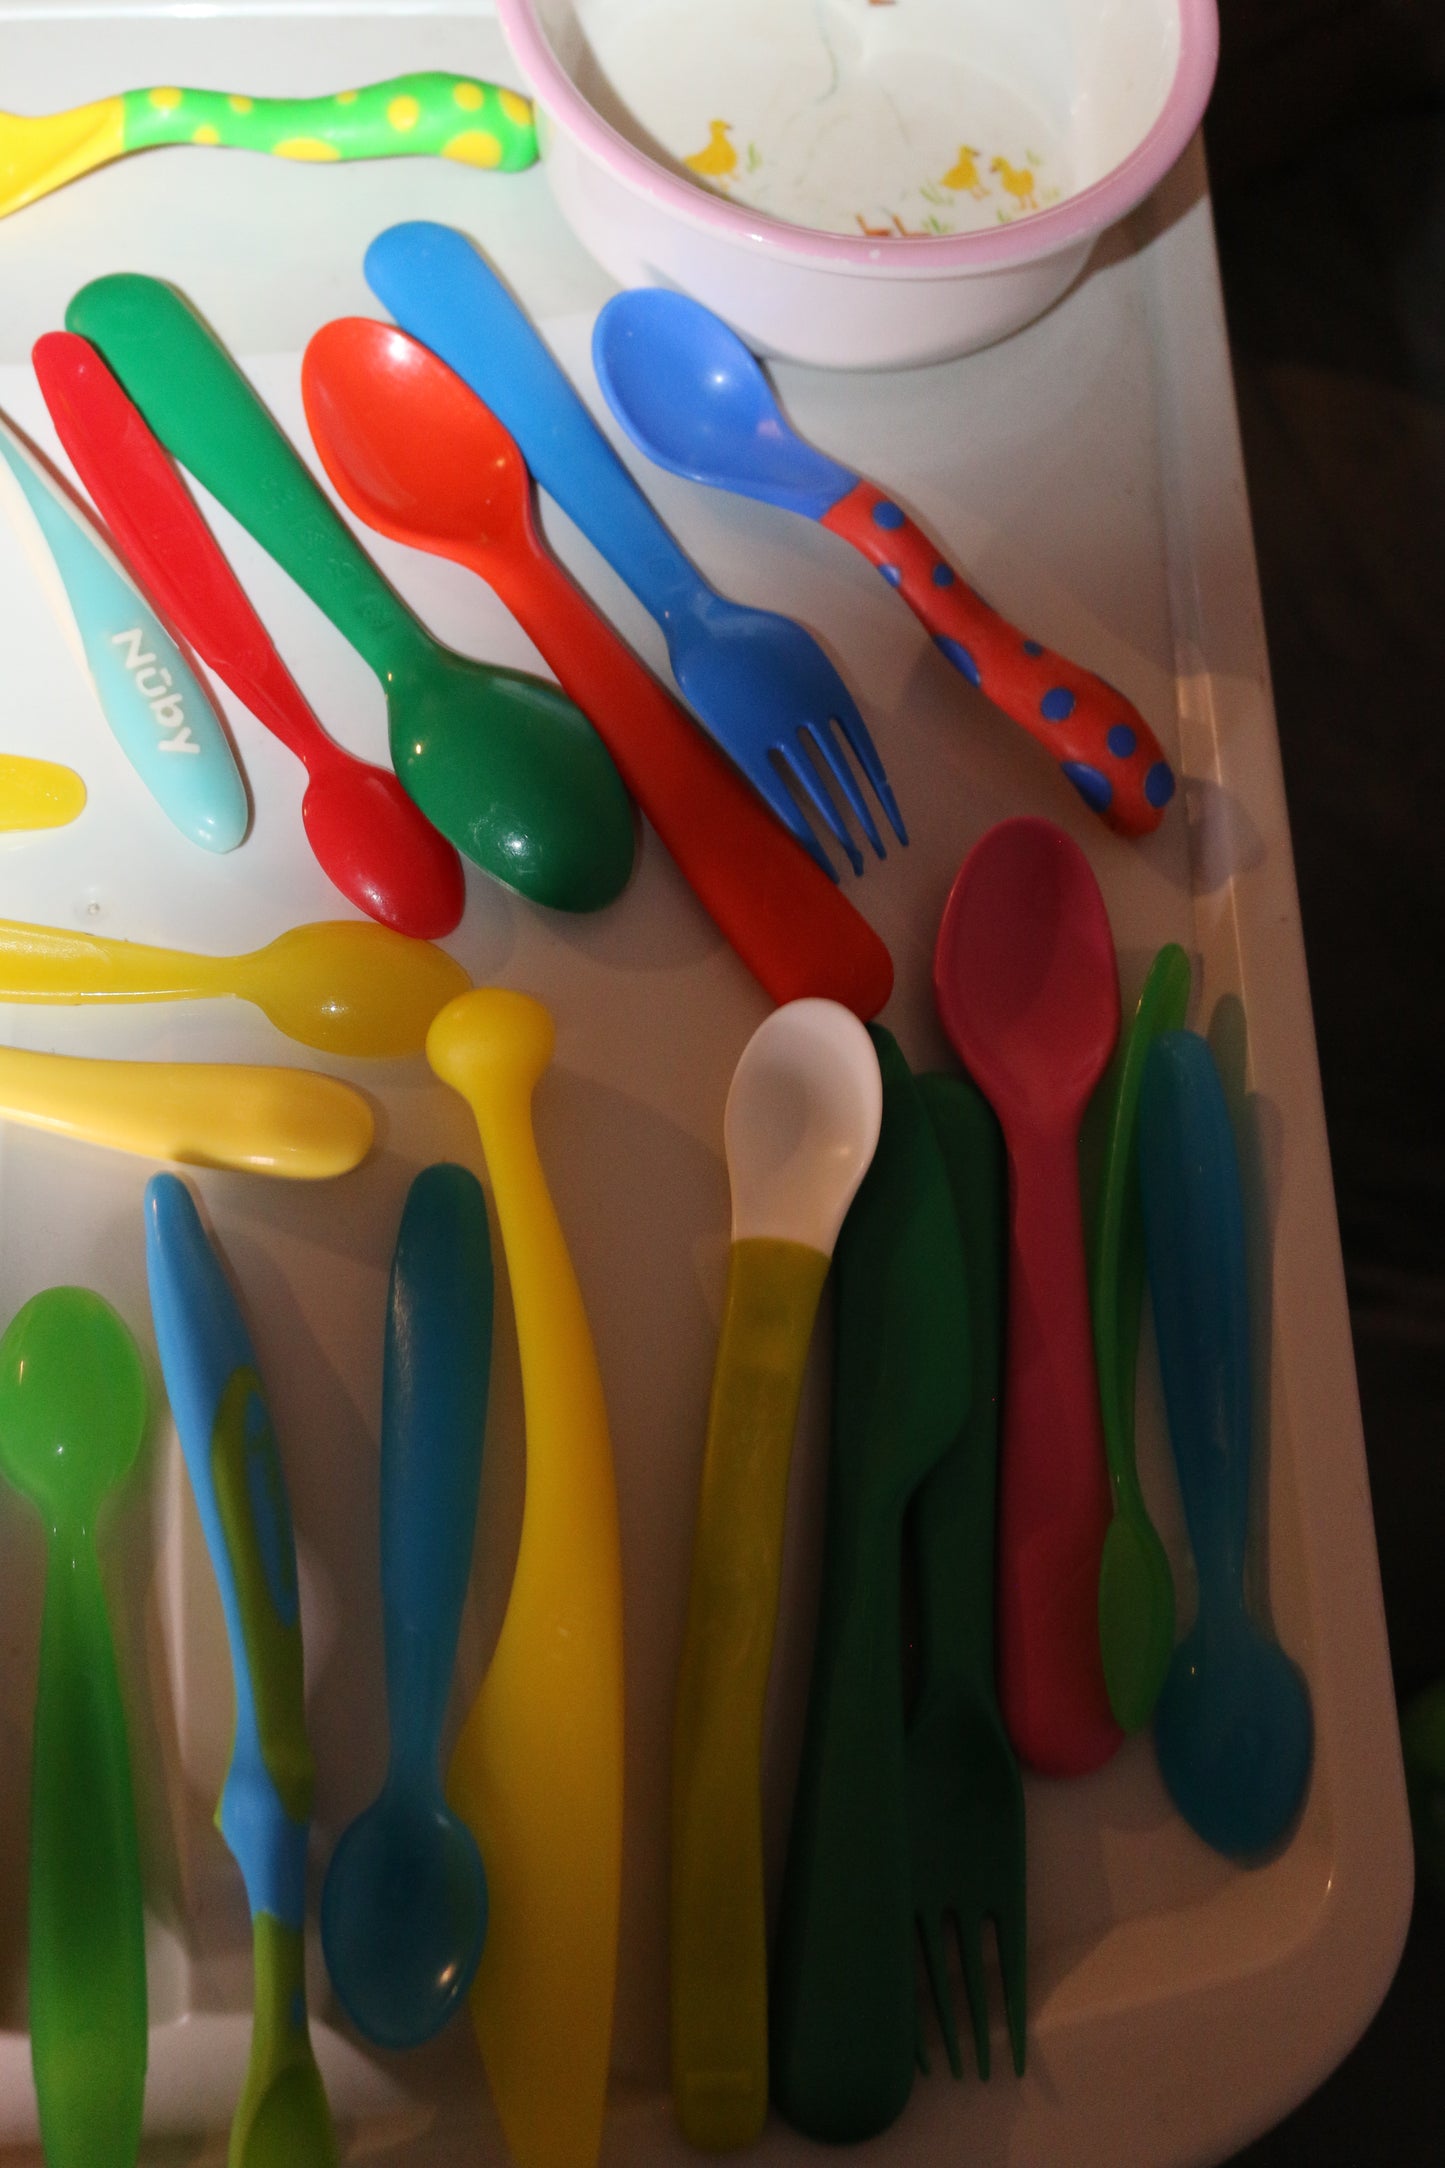 Cutlery huge lot mixed Knives,Forks, Spoons Blue, Green toys for kids & 1 bowl